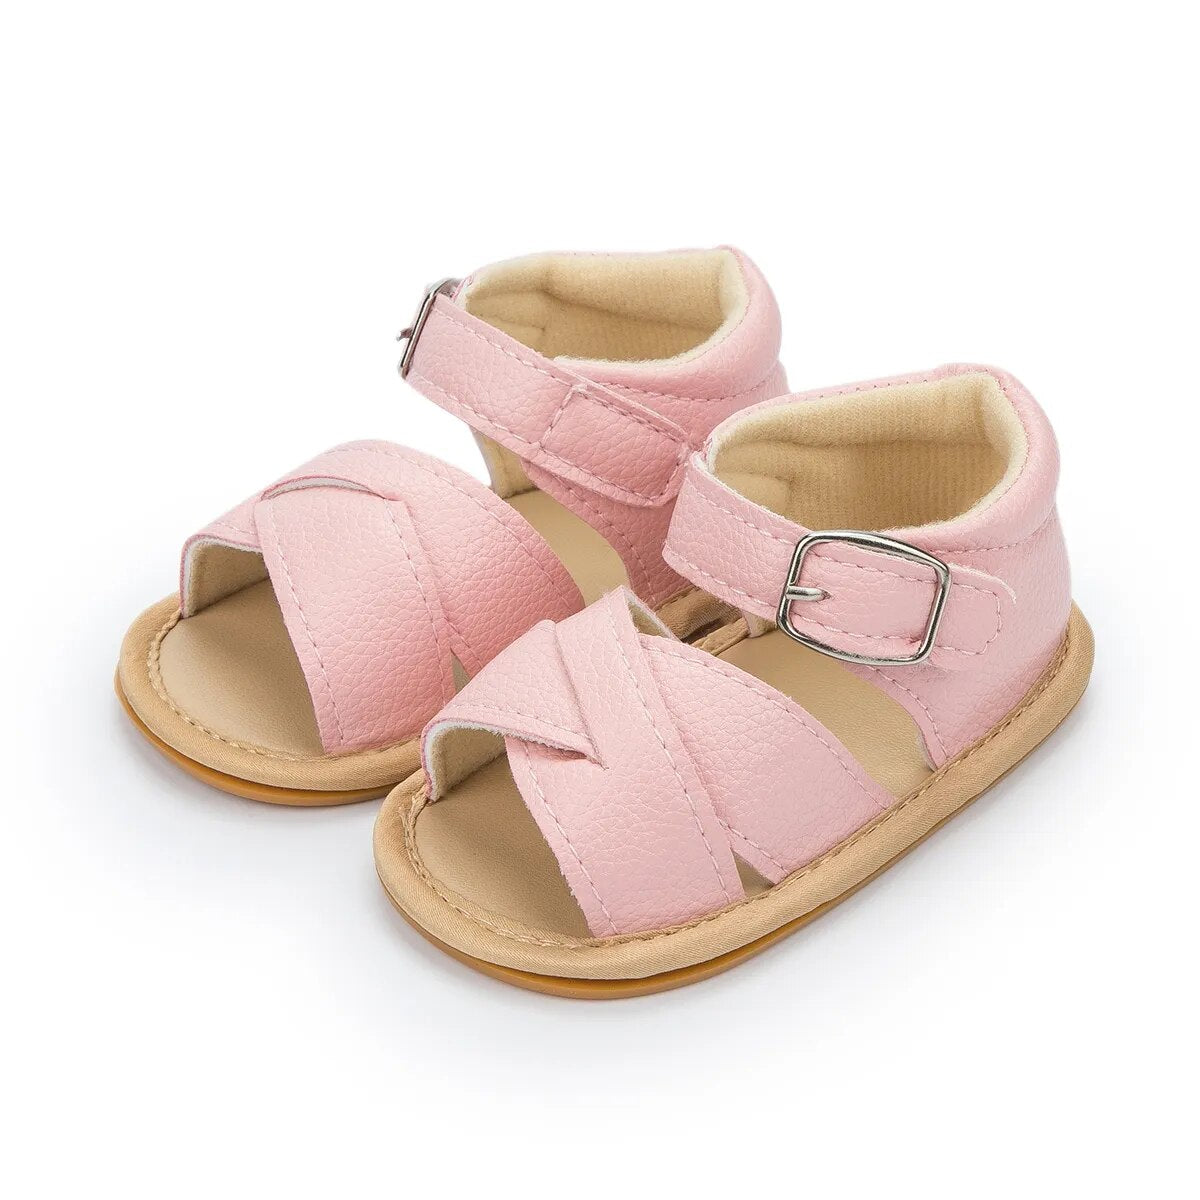 Baby Girl Sandals Baby Shoes Flats Leather Rubber Sole Anti-Slip First Walker Newborn Toddler Sandals - BGSD50777